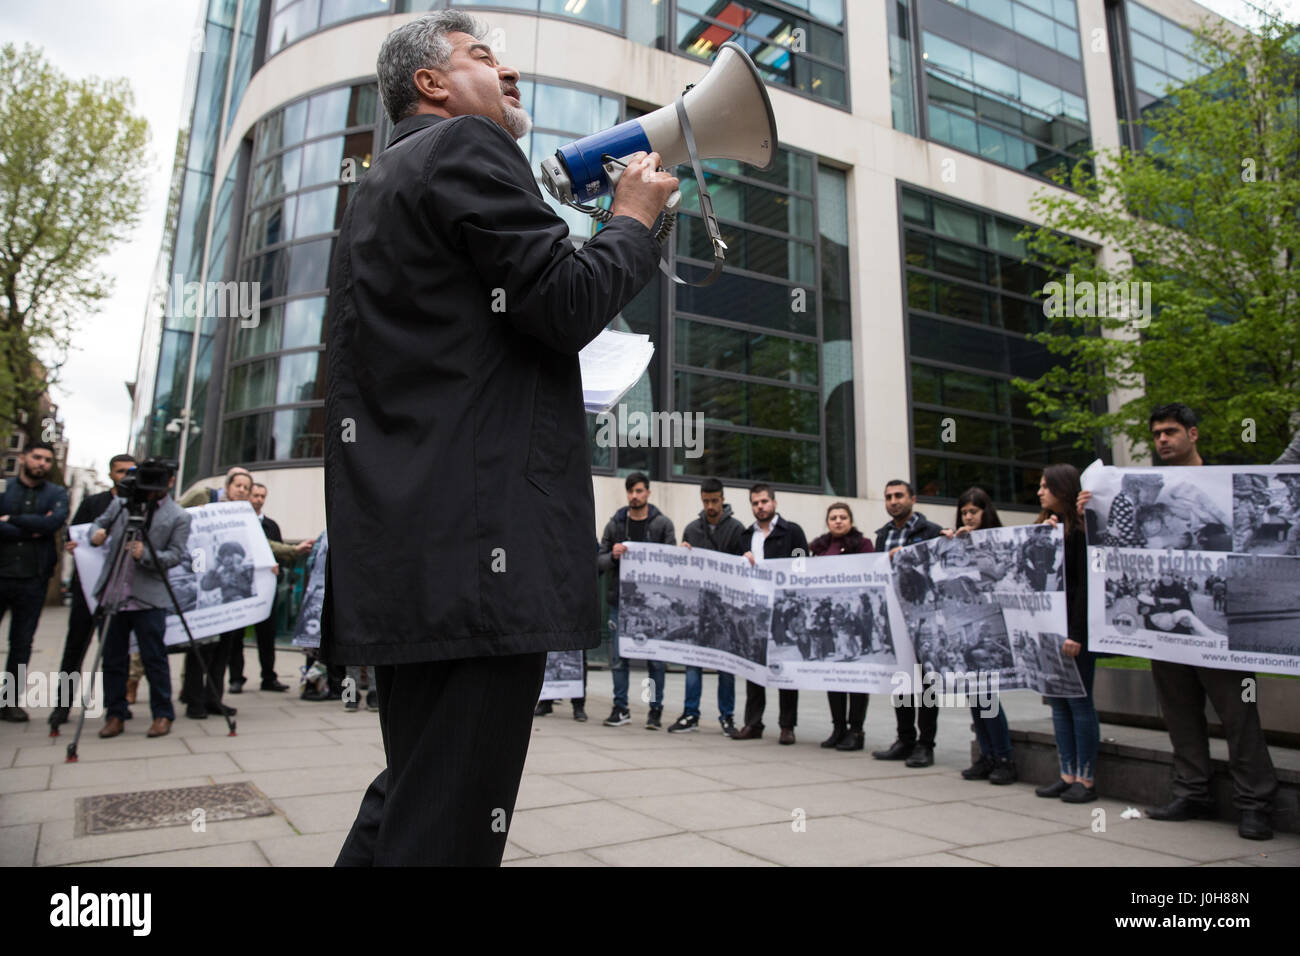 London, UK. 13th April, 2017. Dashty Jamal addresses members of the UK's Iraqi community and supporters attending an emergency demonstration organised by the International Federation of Iraqi Refugees to protest against the detention of 30 Iraqi refugees during the past week, believed to be in preparation for a mass deportation charter flight to Iraq. Stock Photo